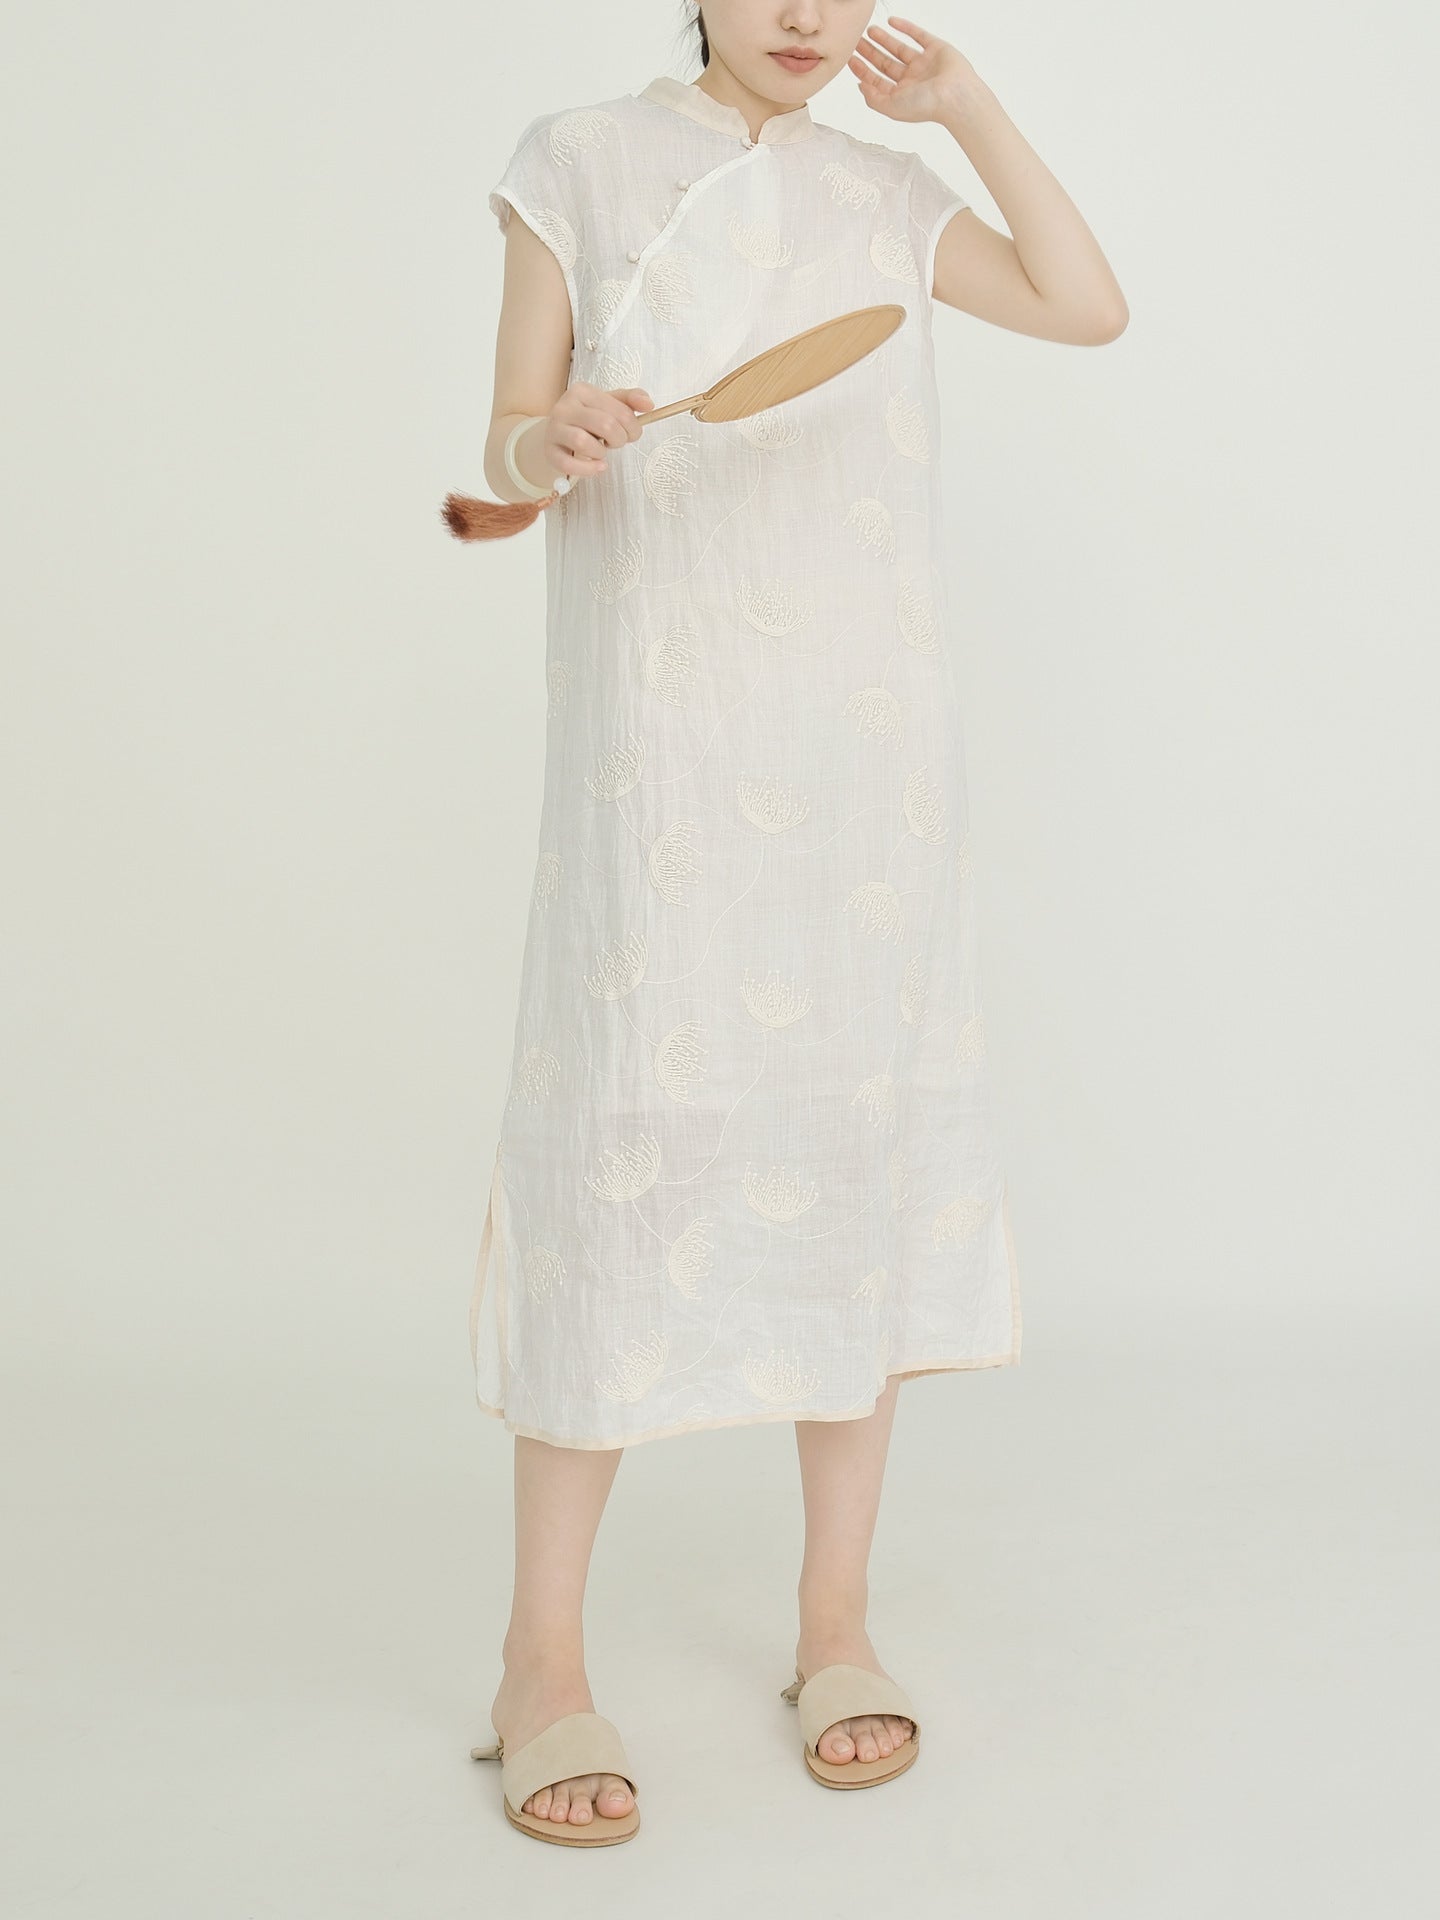 Fireflies Embroidered Cheongsam Dress in Off White